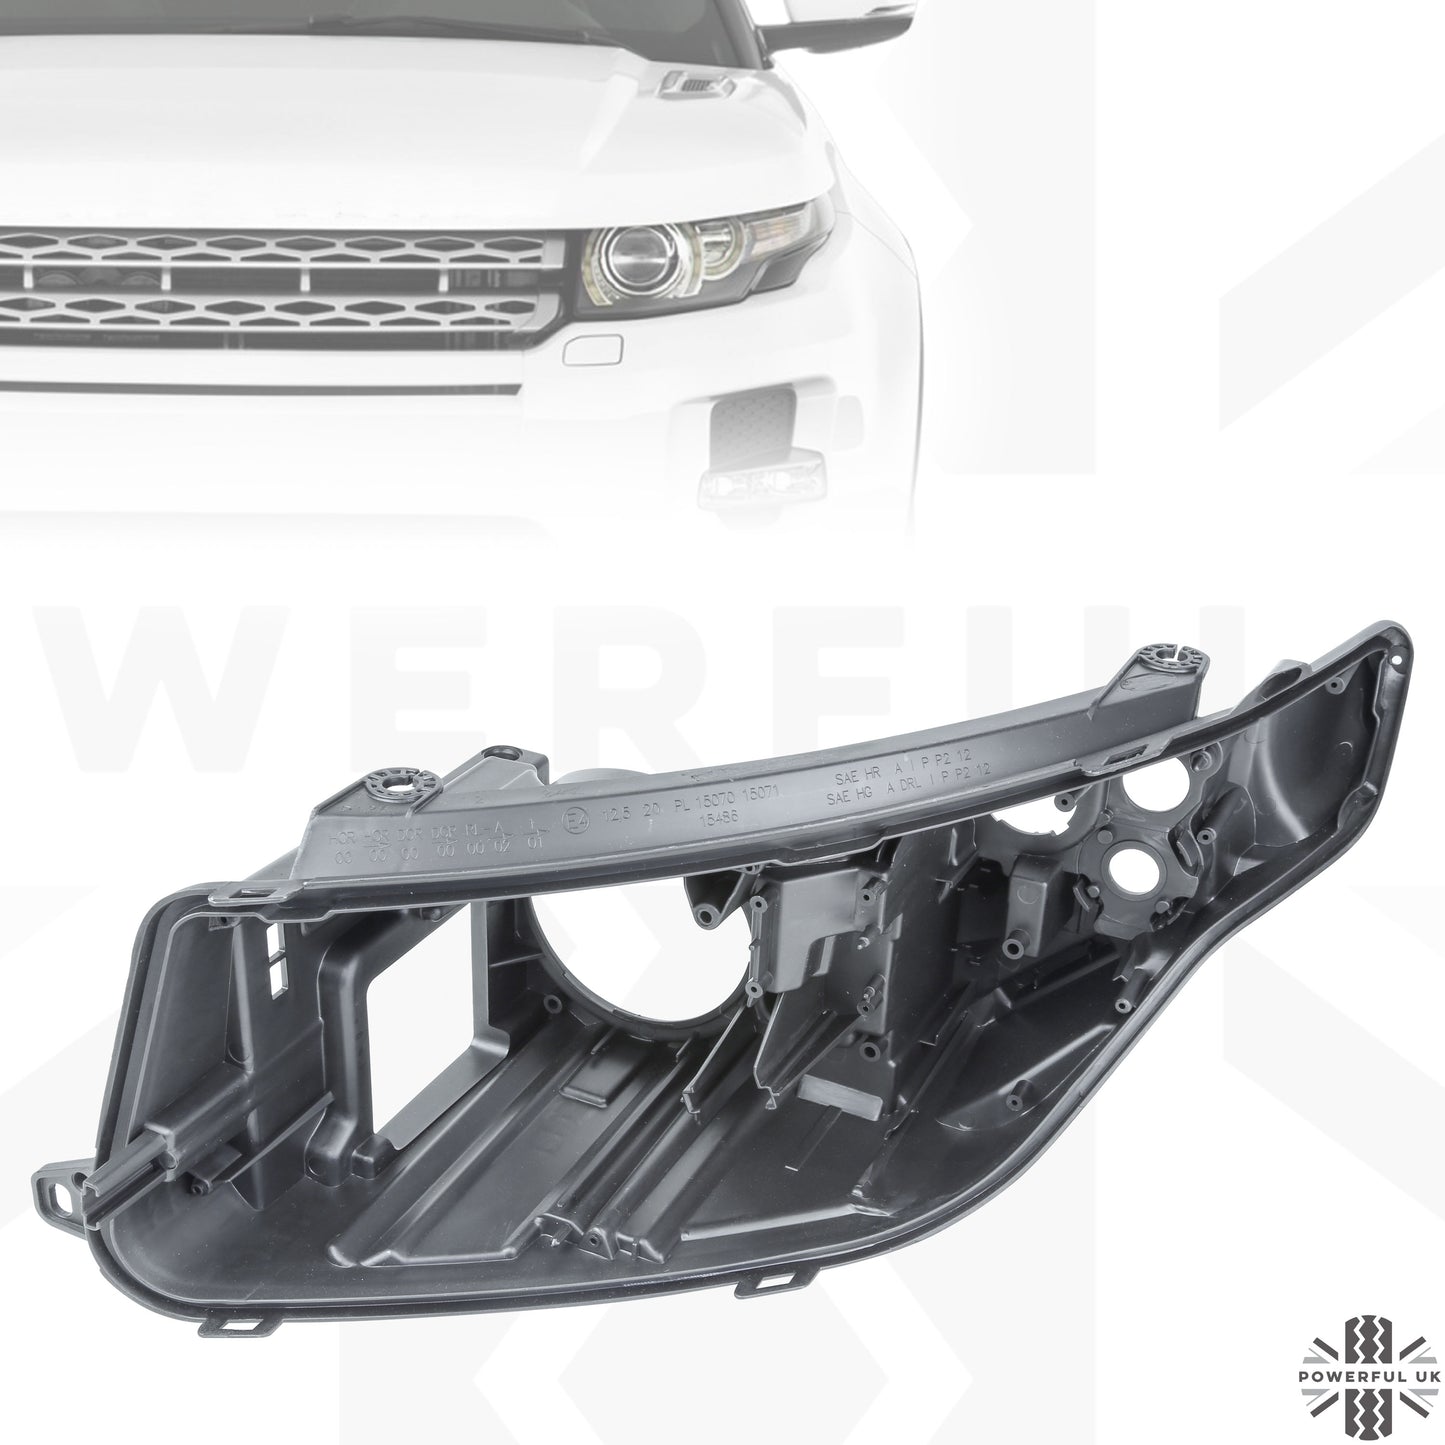 Replacement Headlight Rear Housing for Range Rover Evoque 2011-15 - LH